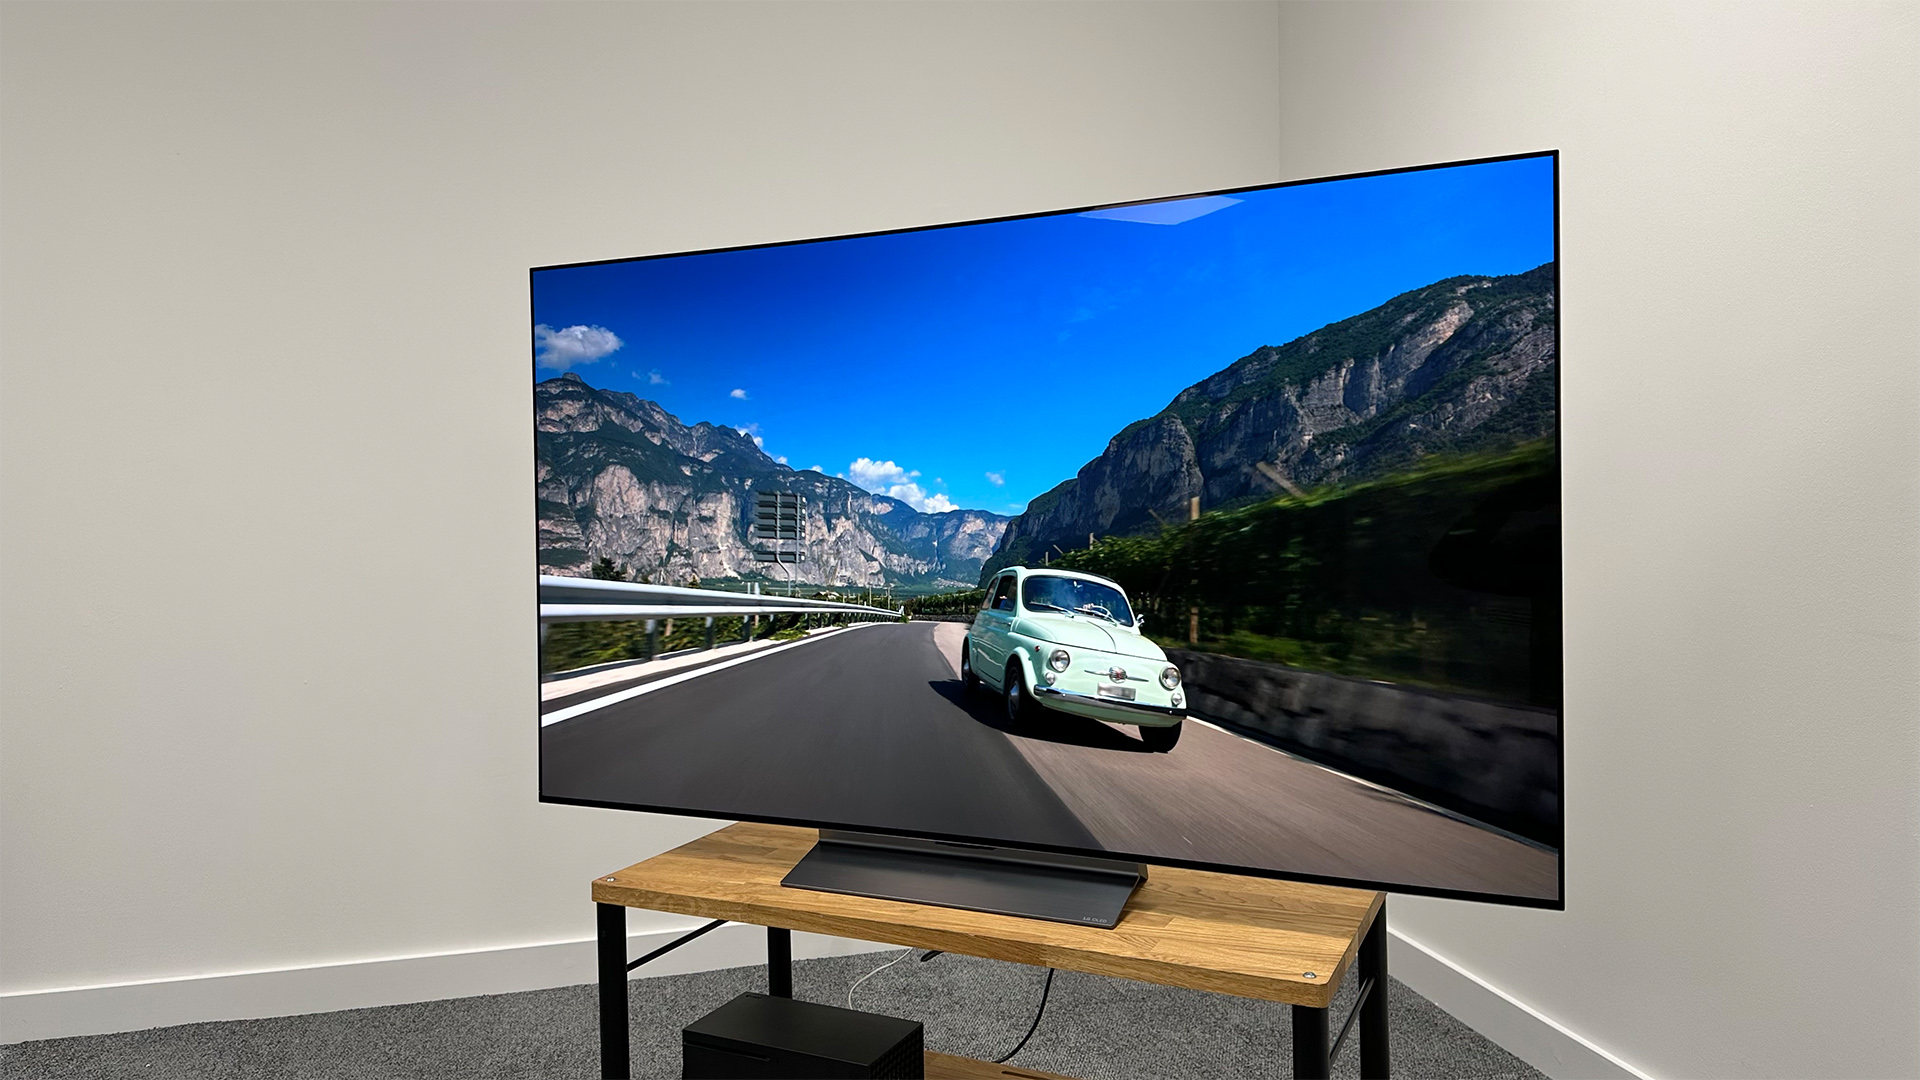 LG OLED55C3 (55, 4K, HDR): Price, specs and best deals